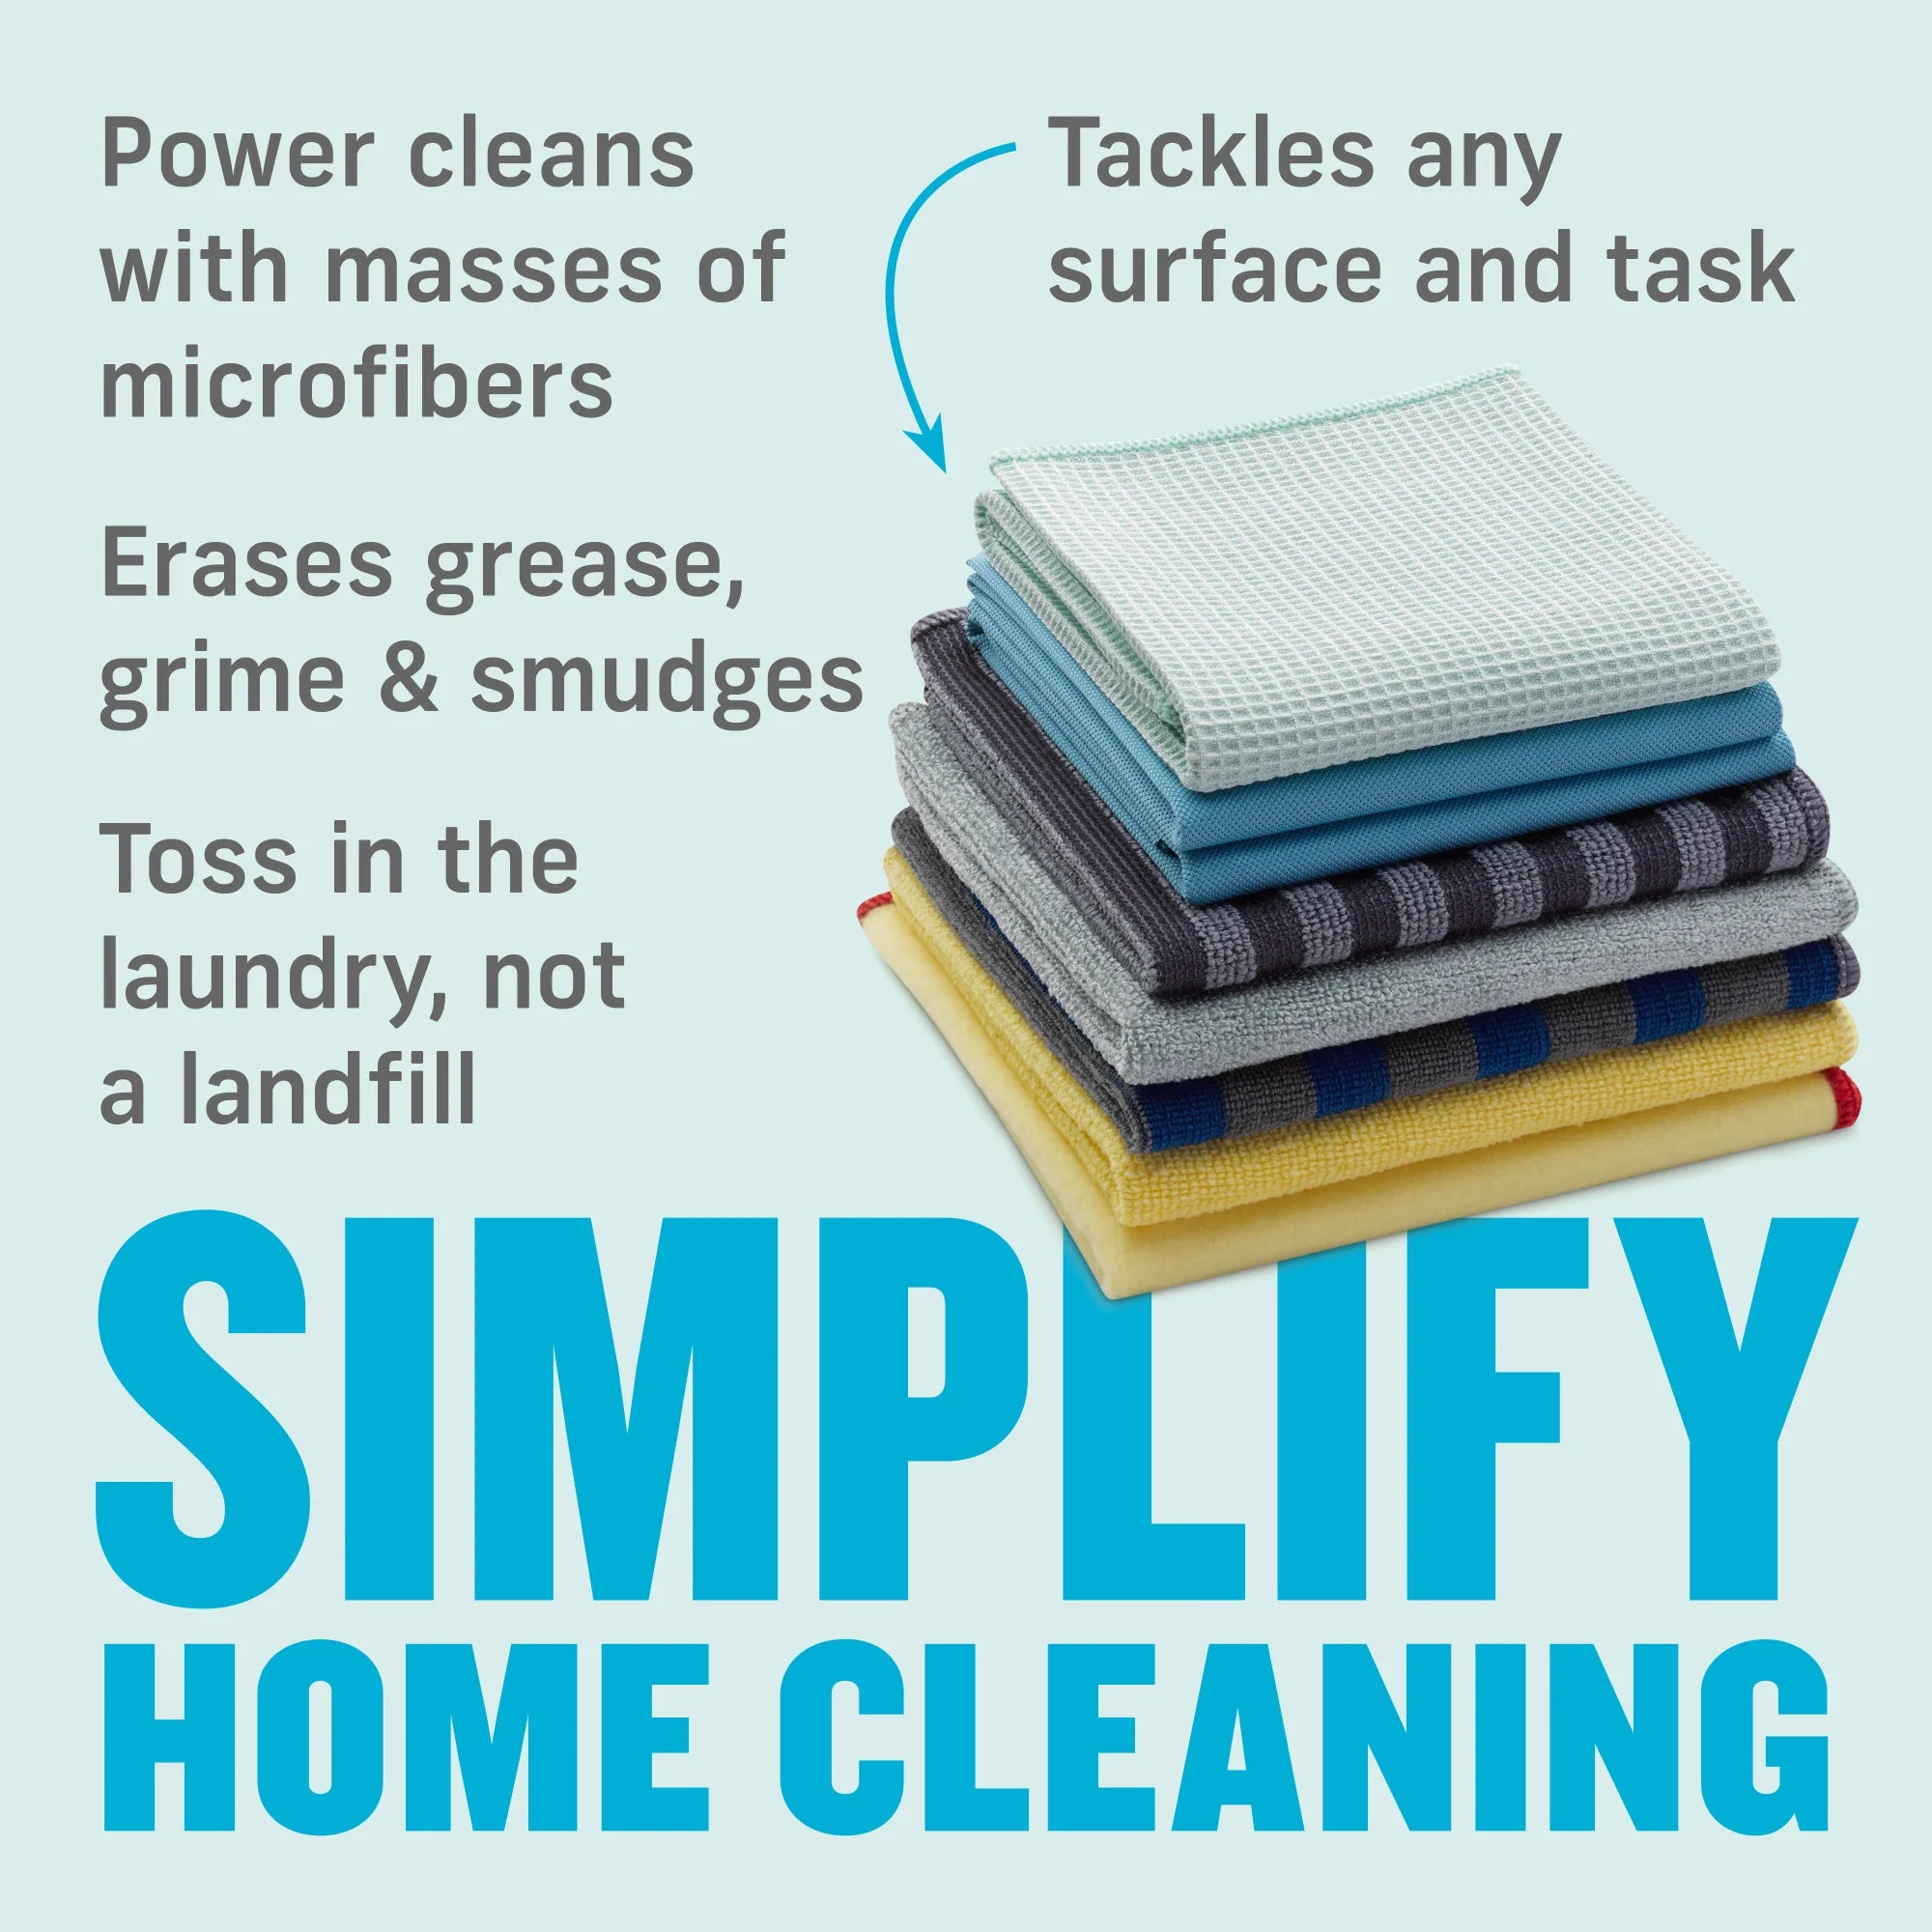 E-Cloth, Home Cleaning Set with 8 cloths Chemical Free, Easy To Use